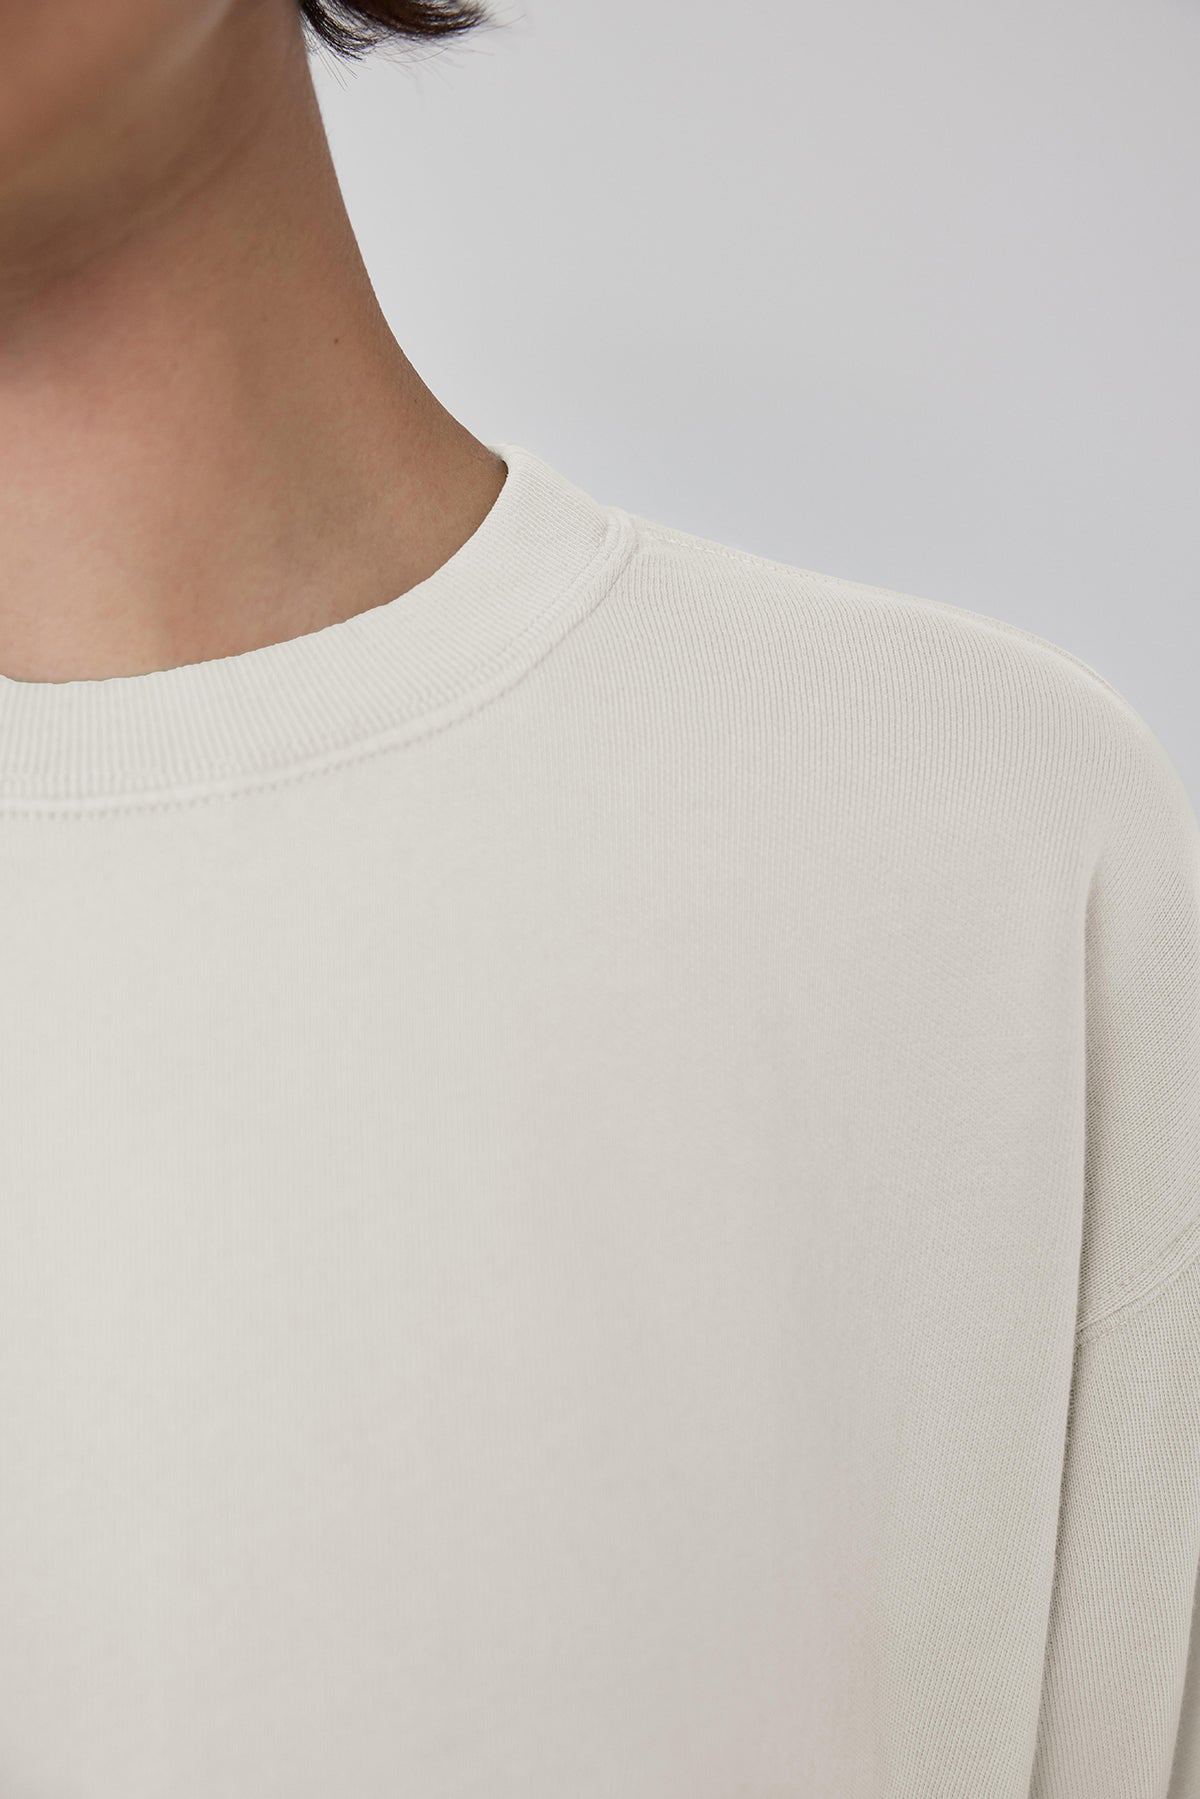   A woman wearing a white YNEZ SWEATSHIRT with a slight crop and dropped shoulder by Velvet by Jenny Graham. 